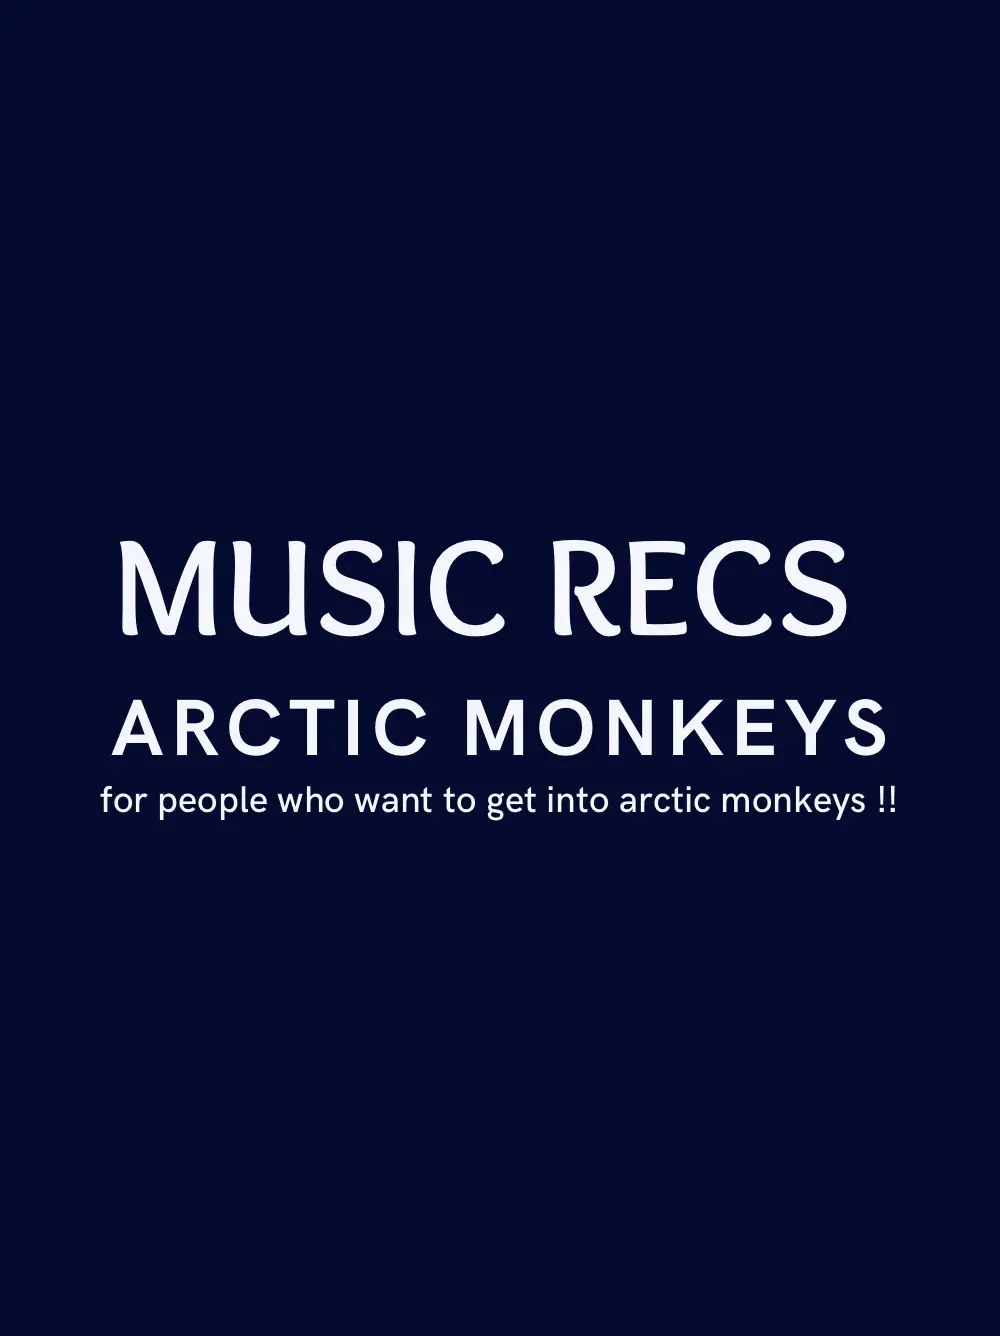 Arctic Monkeys Albums Ranked From Worst to Best: See the List